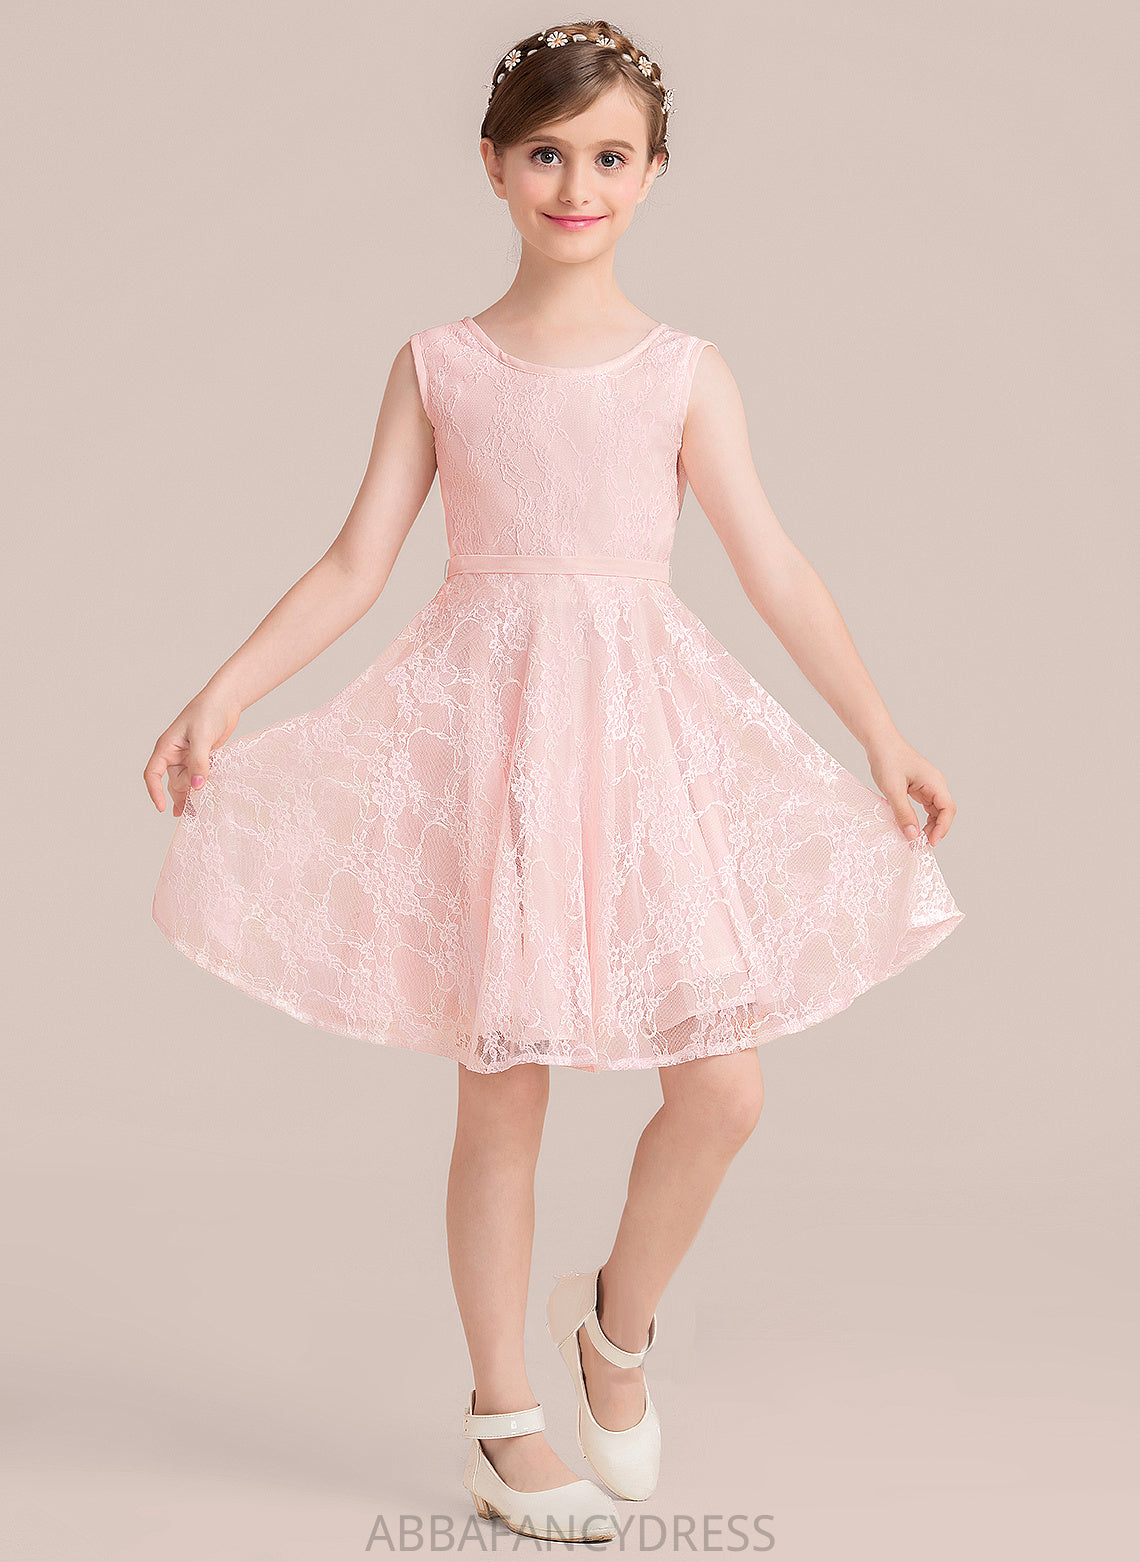 Bow(s) Knee-Length A-Line With Scoop Neck Sash Lace Linda Junior Bridesmaid Dresses